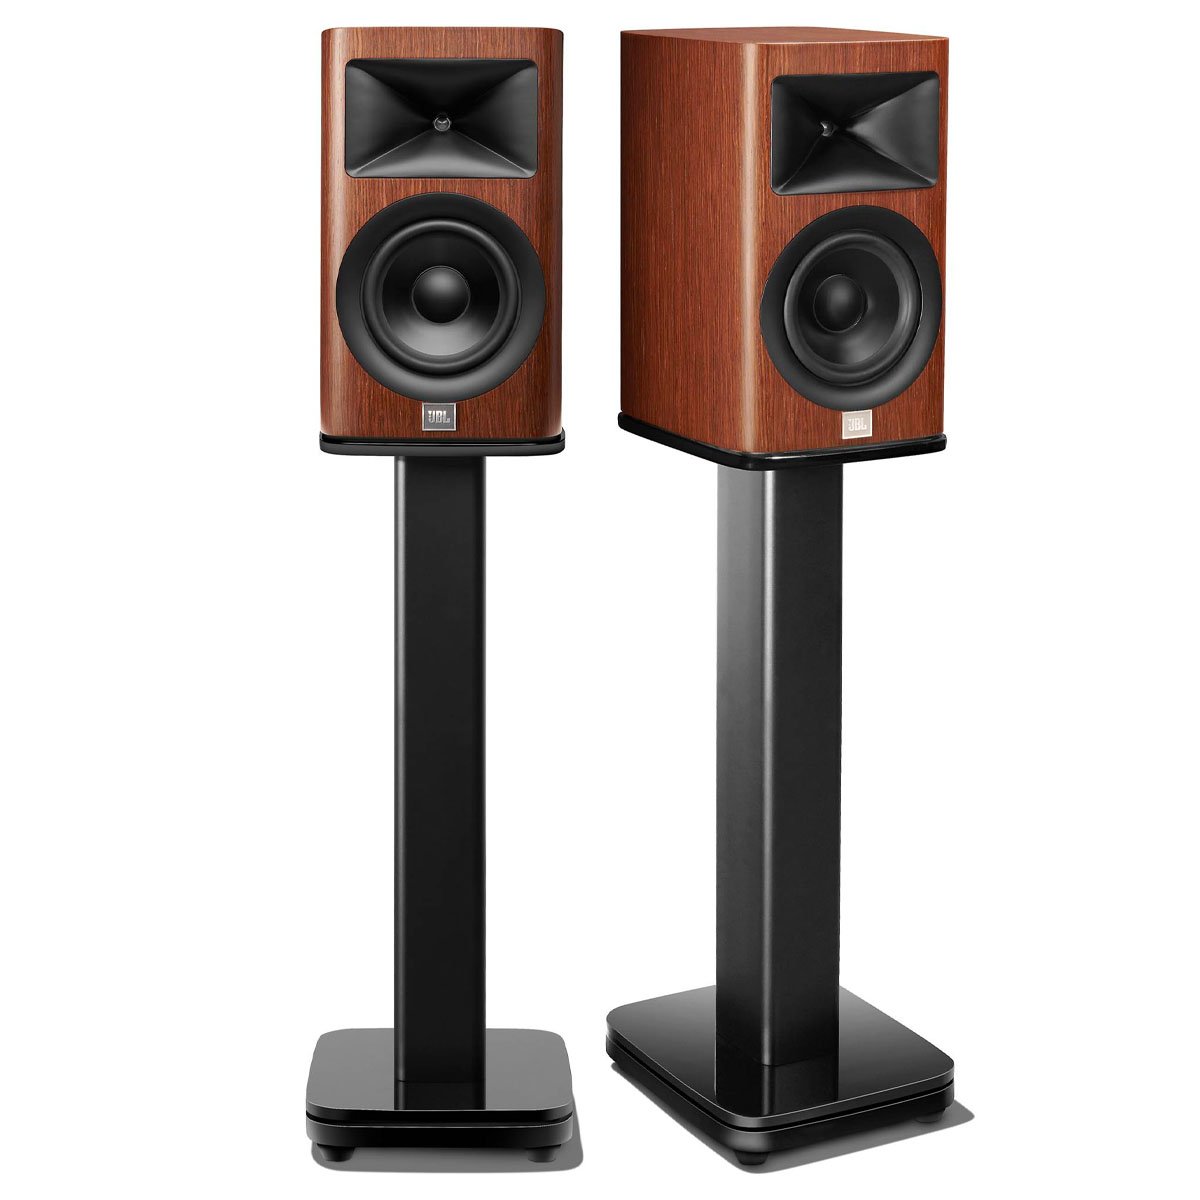 A great home theater speaker set-up requires a big, bold sound! jbl hdifs